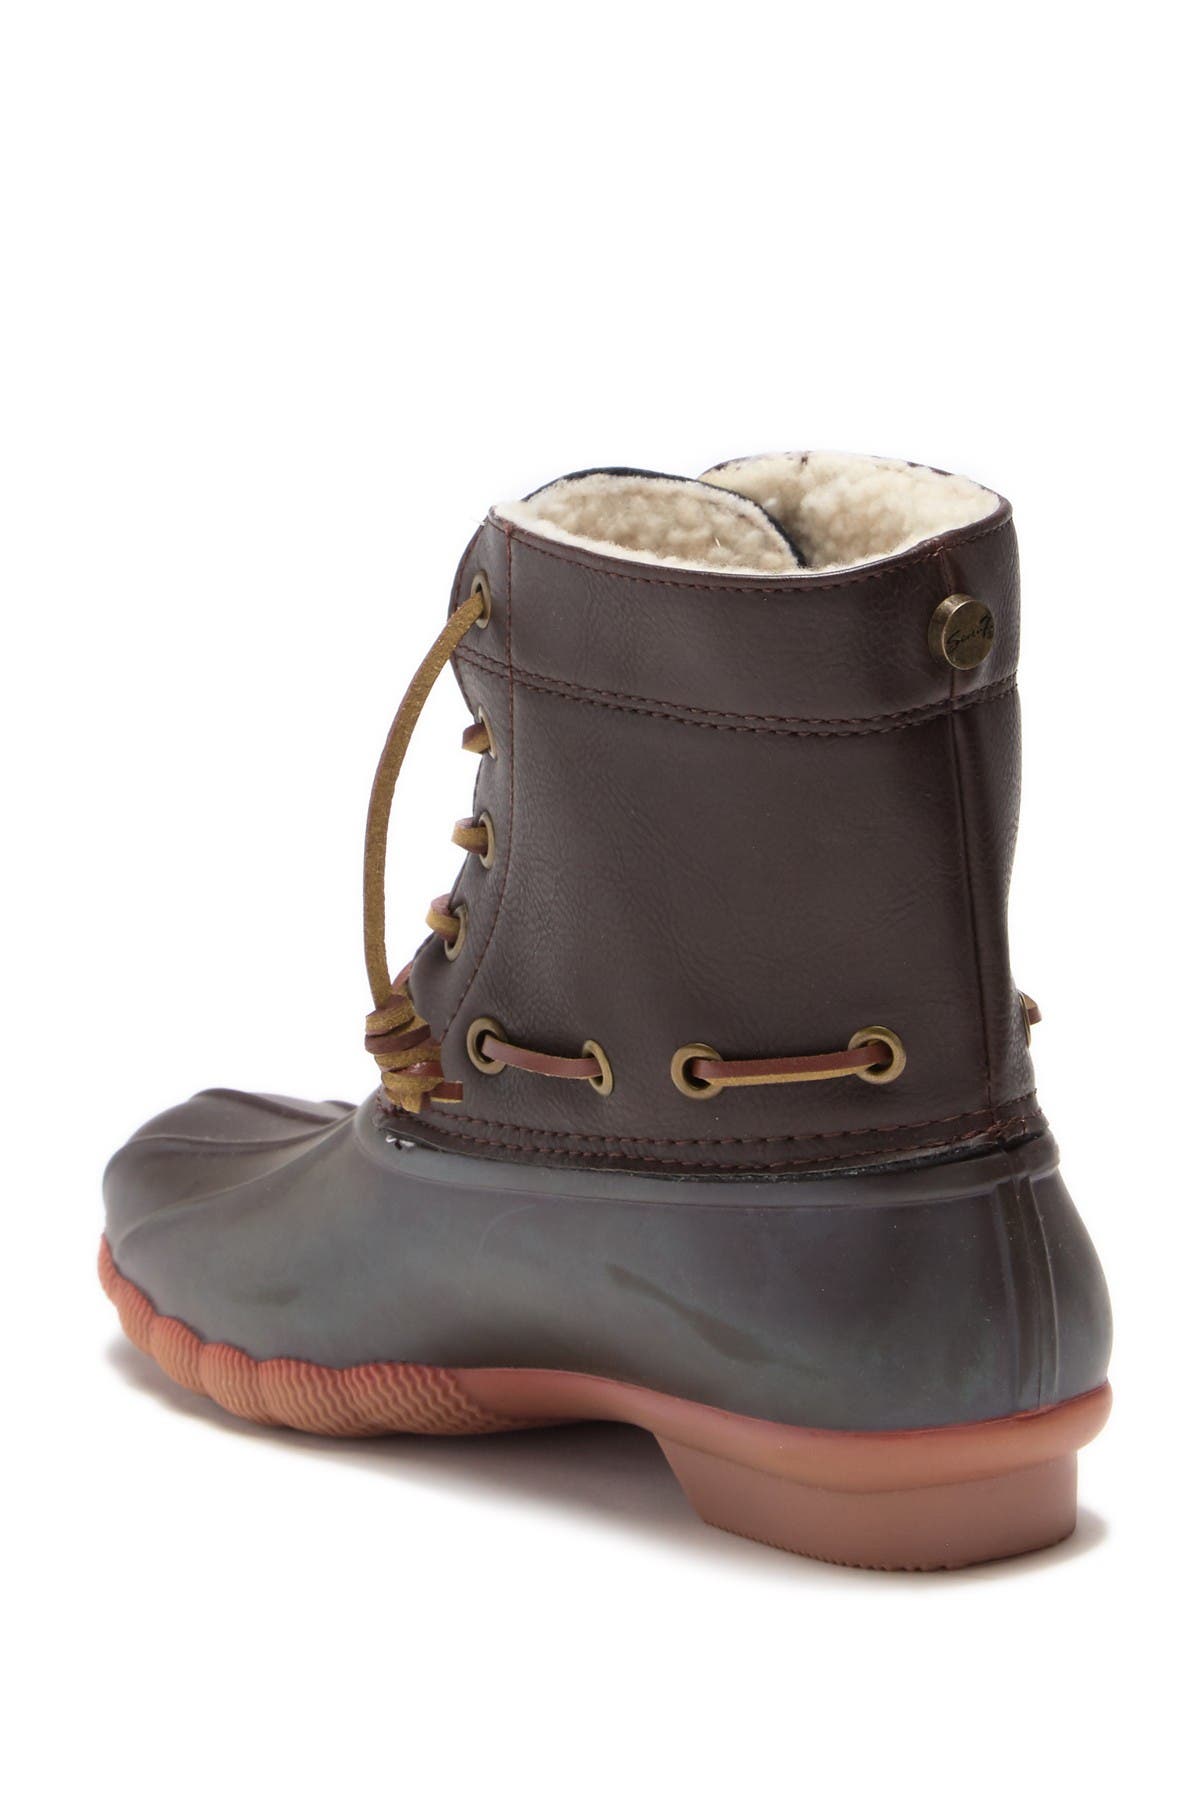 seven7 speyside duck boots